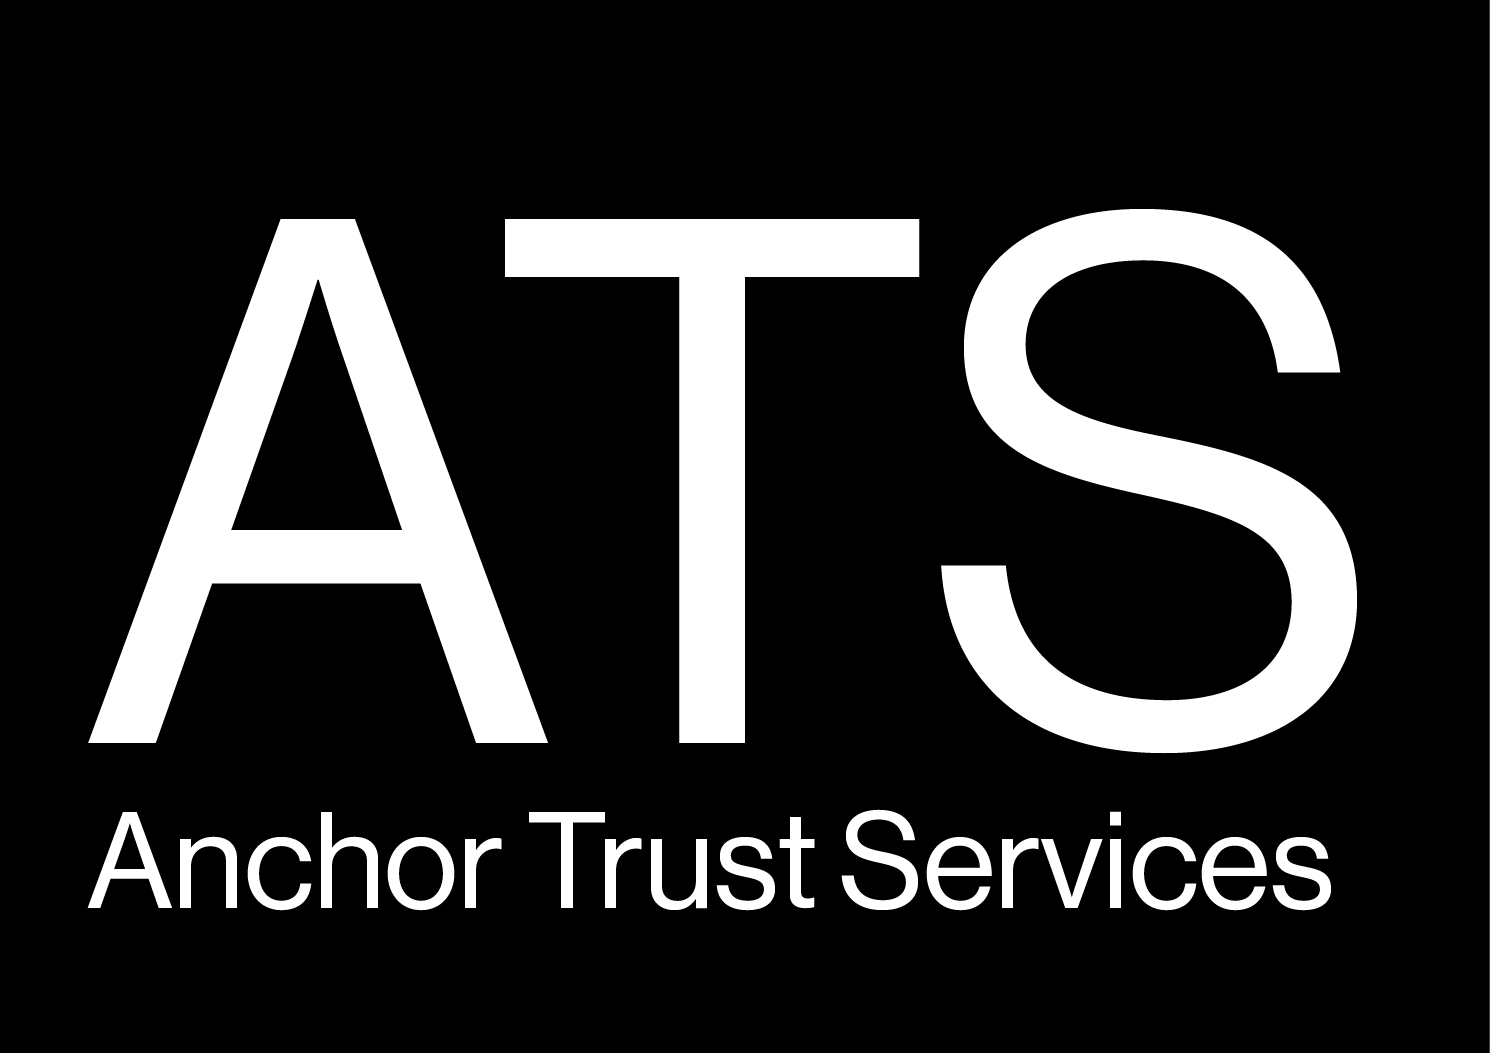 ANCHOR TRUST SERVICES